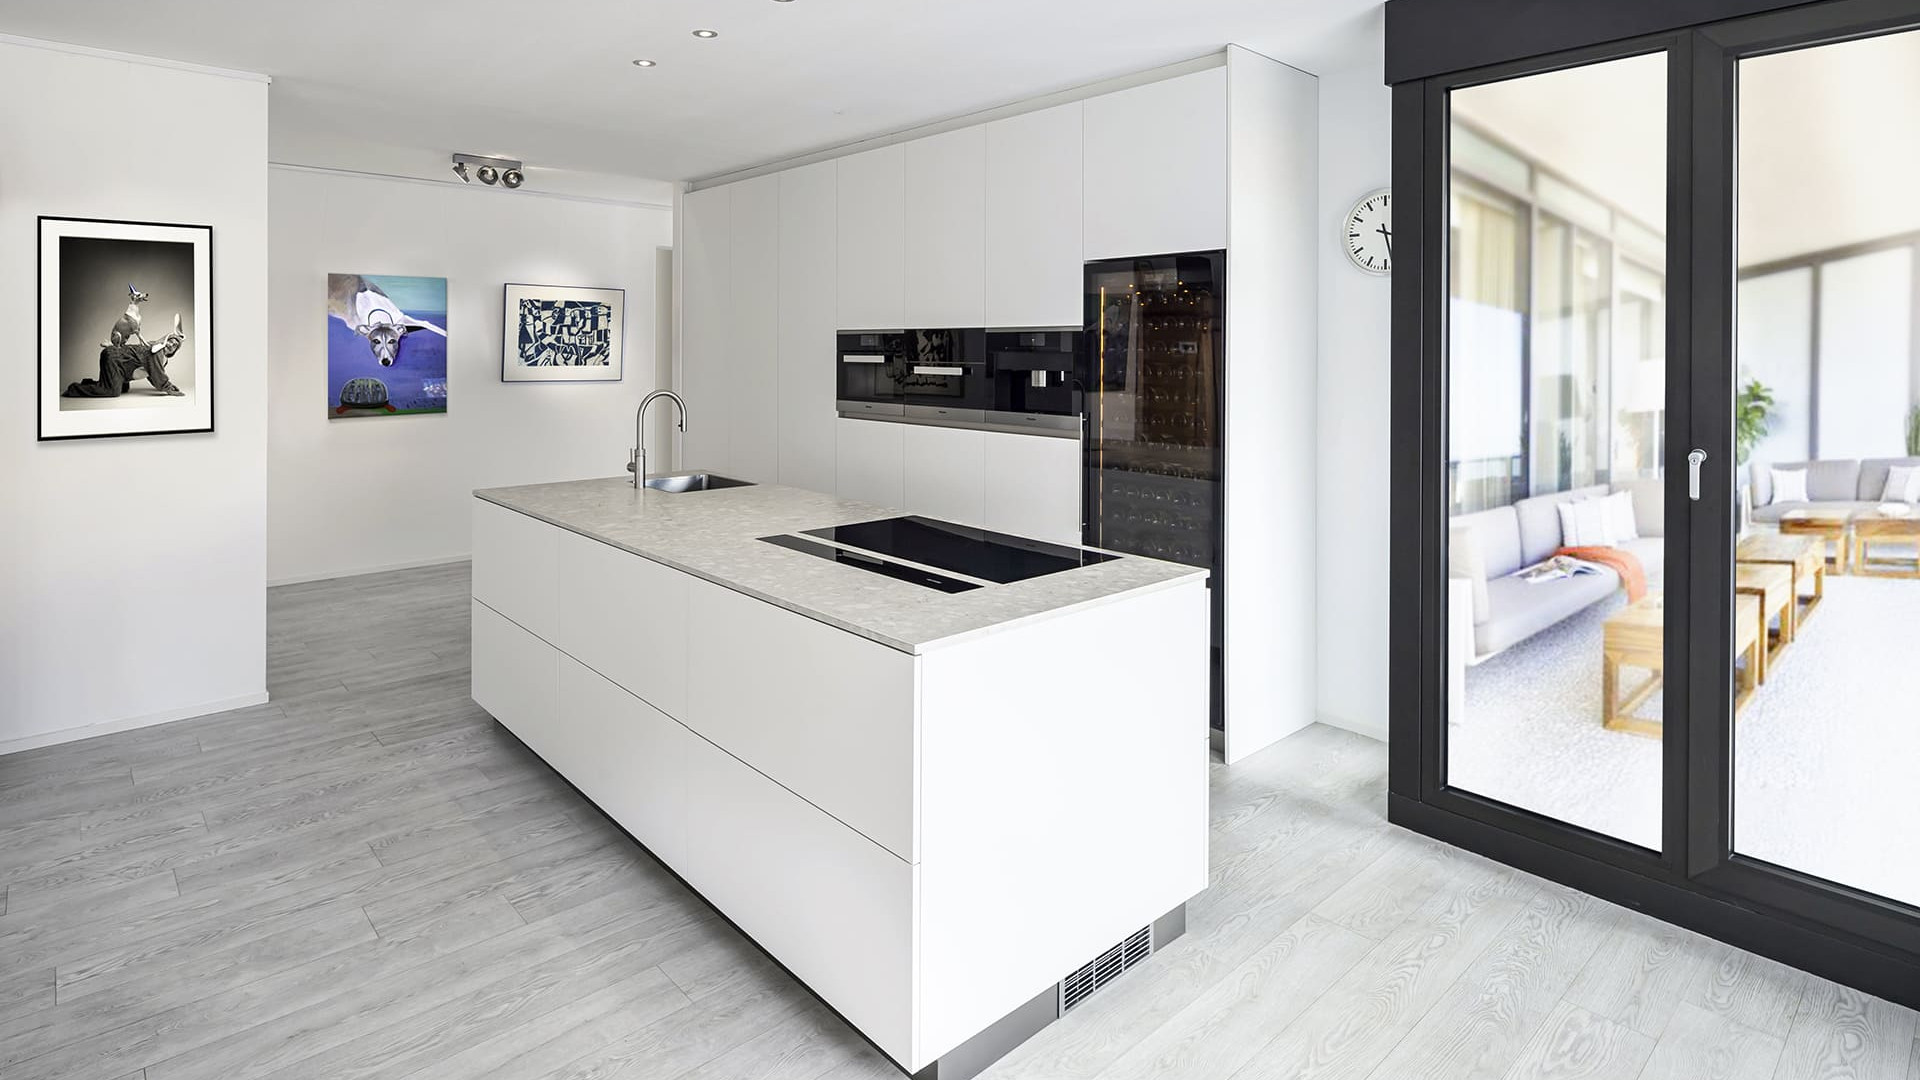 Example of a built-in free-standing wine cabinet in a kitchen with a white and black color scheme in a luxury apartment. EuroCave Revelation